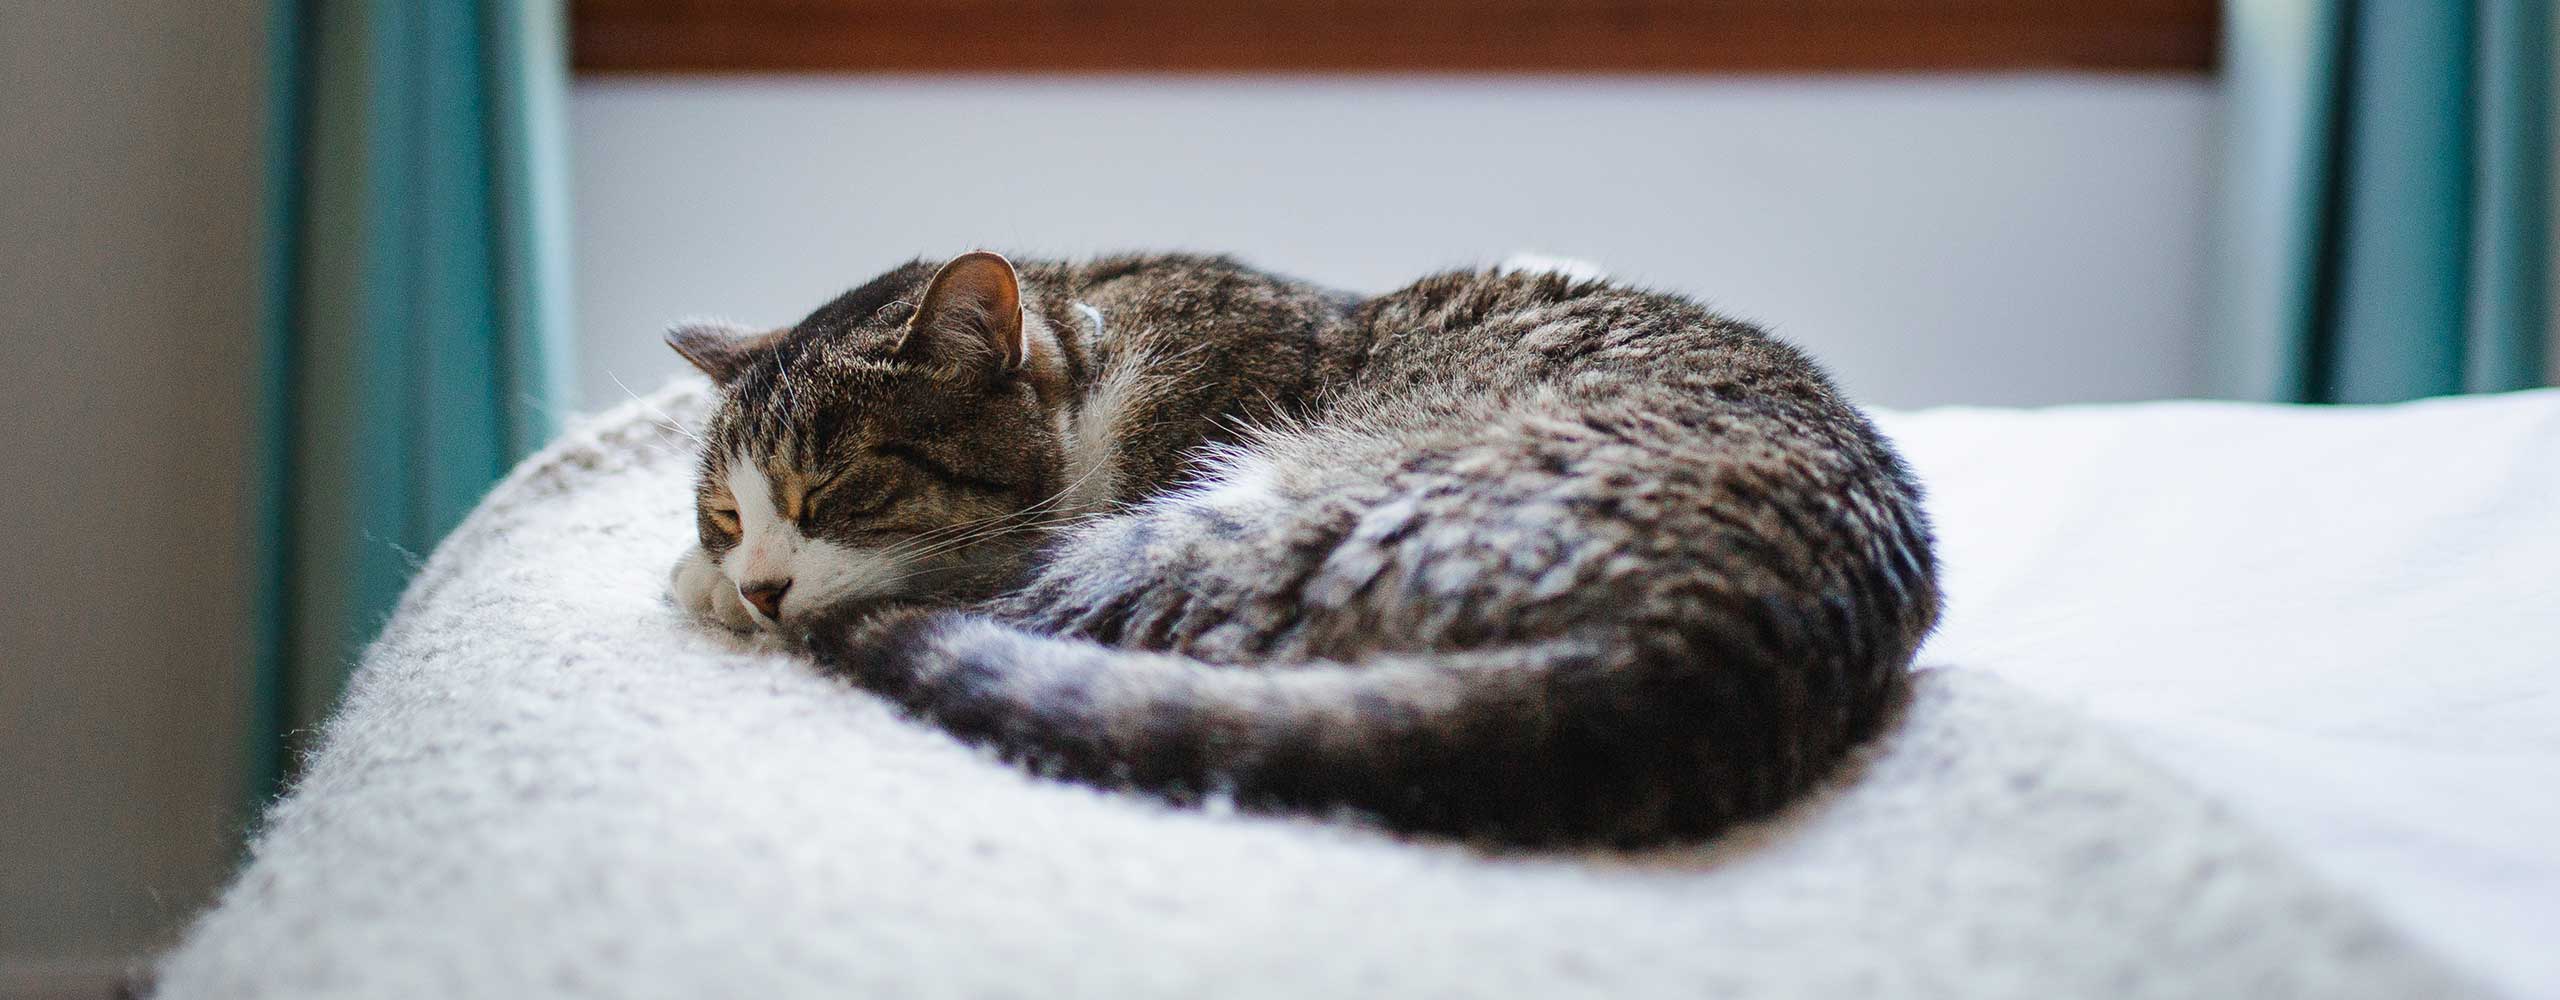 Our 5 easy care tips for your senior cat